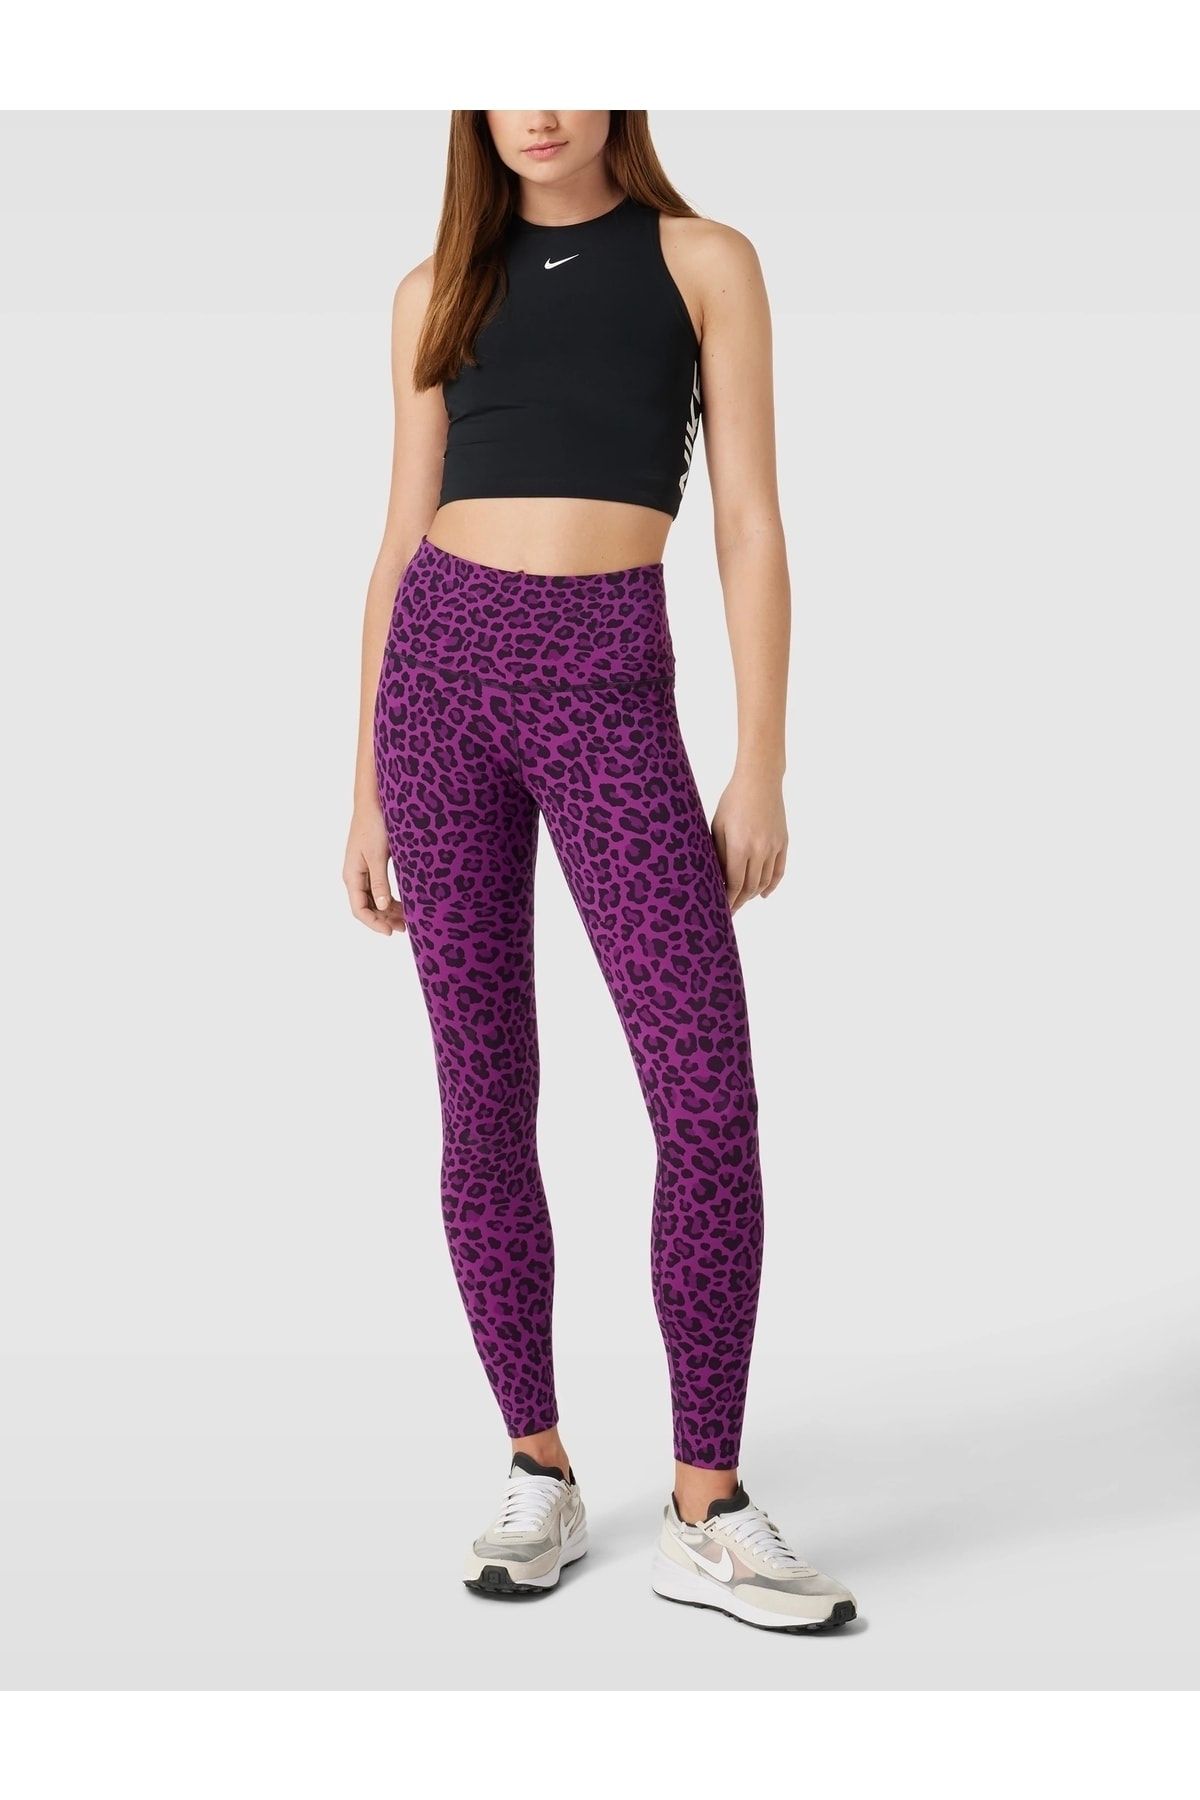 Nike One Luxe Tights Womens Burnt Sunrise, £33.00